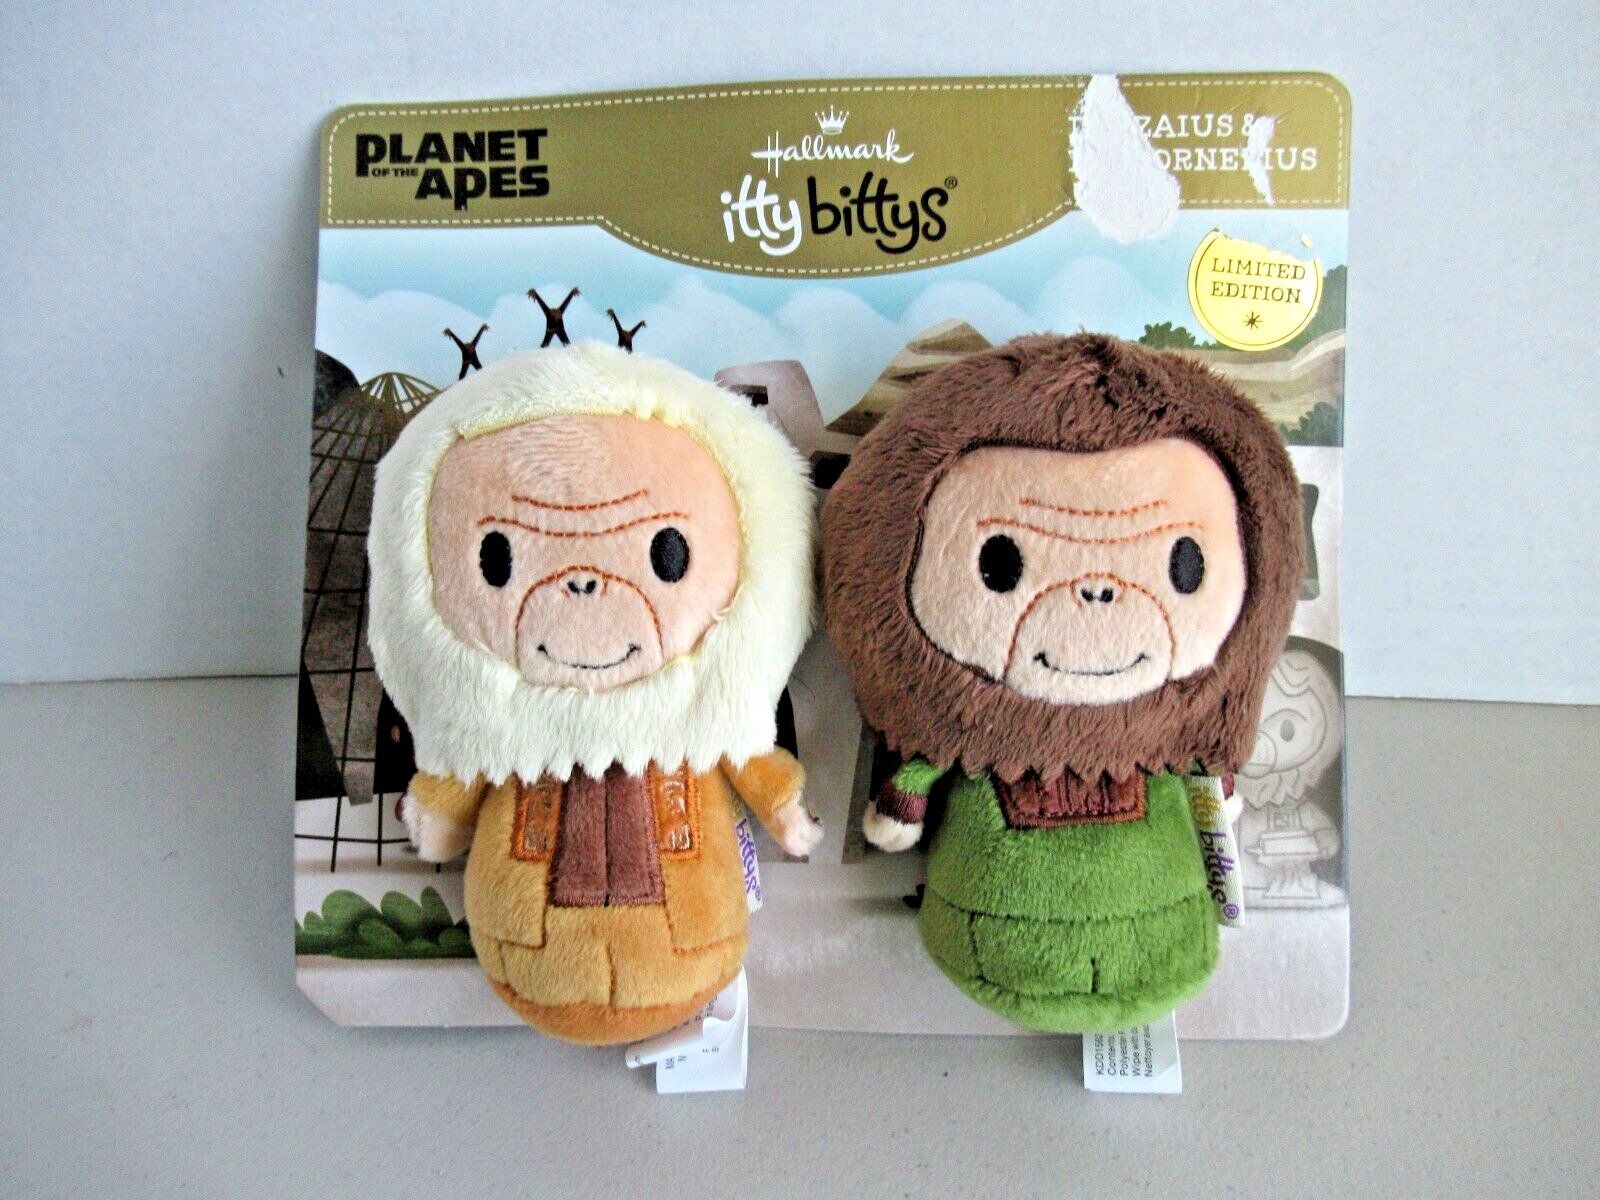 Hallmark-Itty Bitty-Planet of The Apes Dr. Zaius & Dr. Cornelius-limited edition